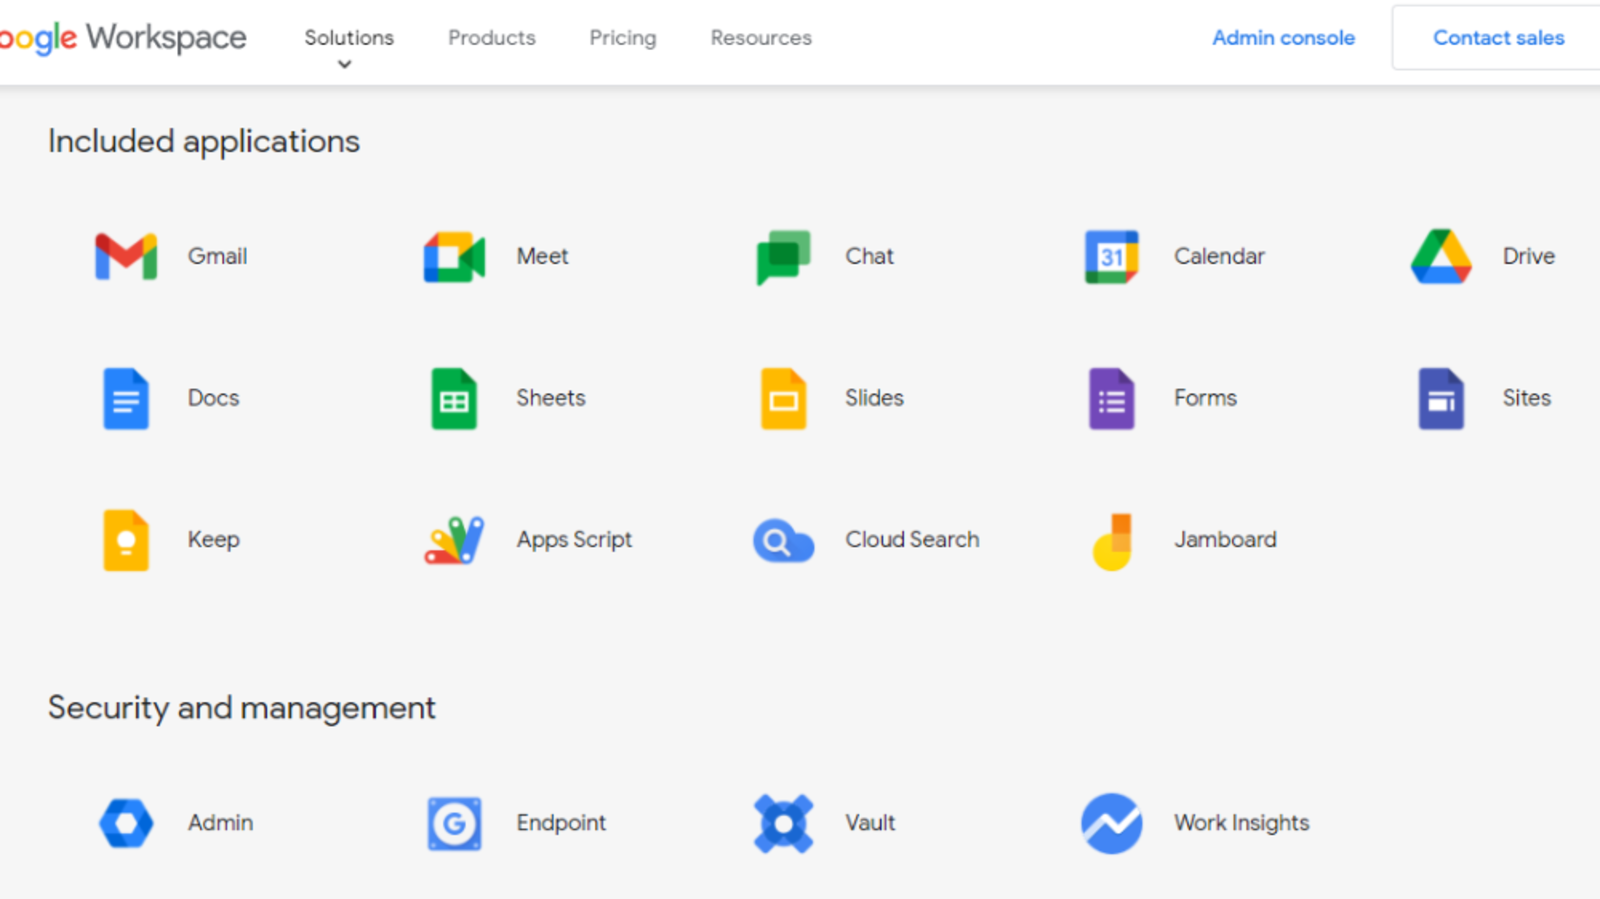 Organization Storage Full: Do You Need More Space for Data in Google  Workspace Admin? 